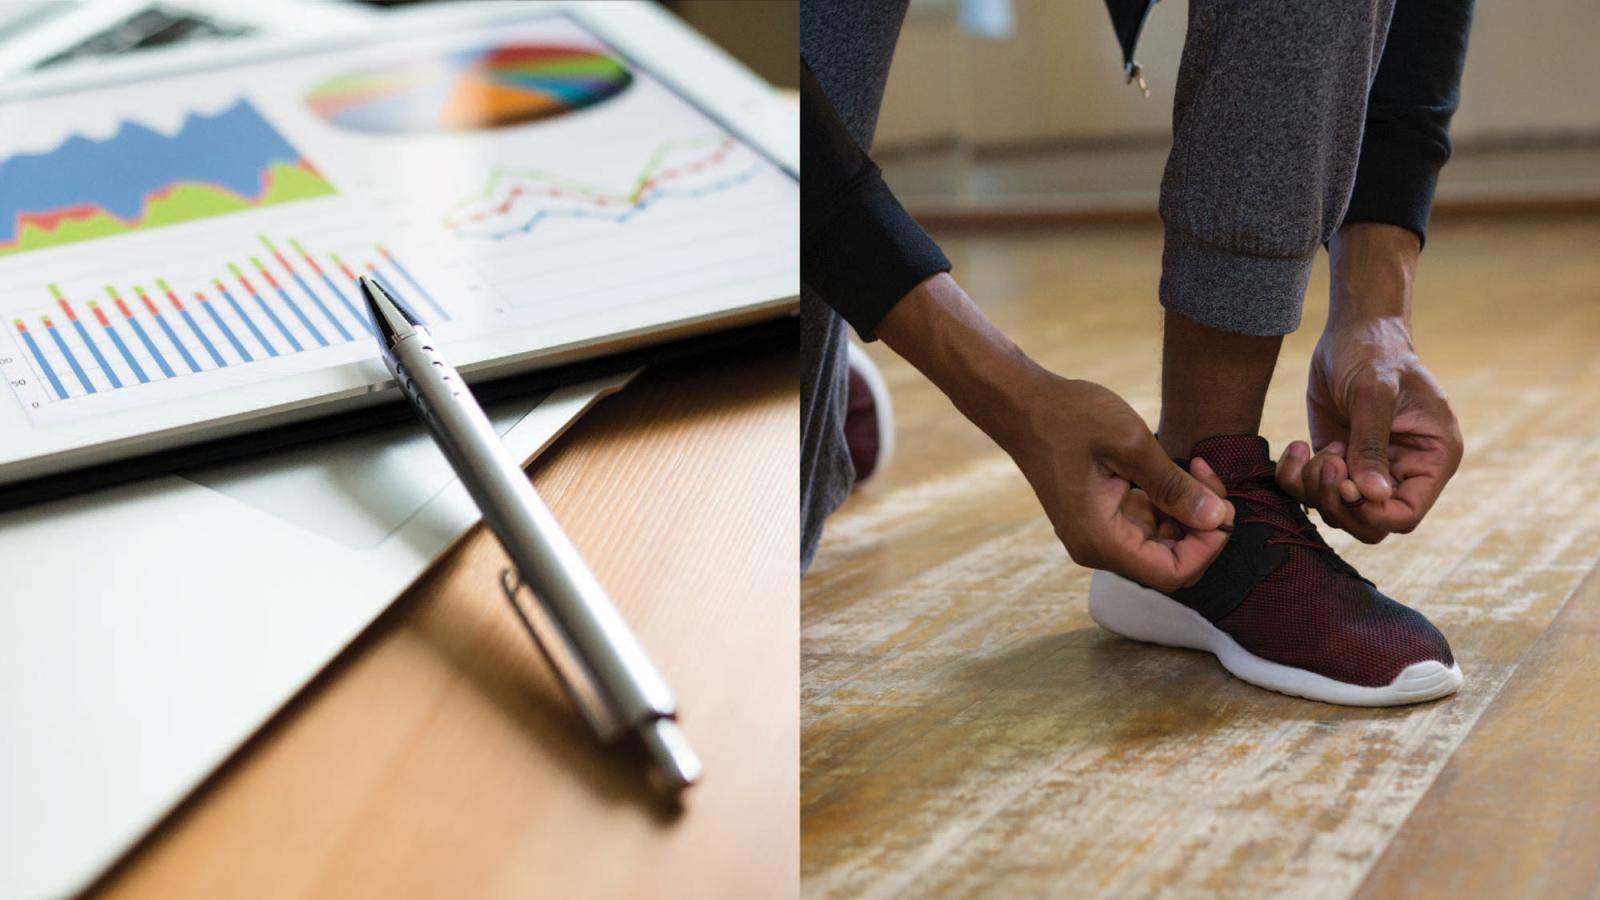 split image of a pen and paper on the left, and a person tying their shoe on the right